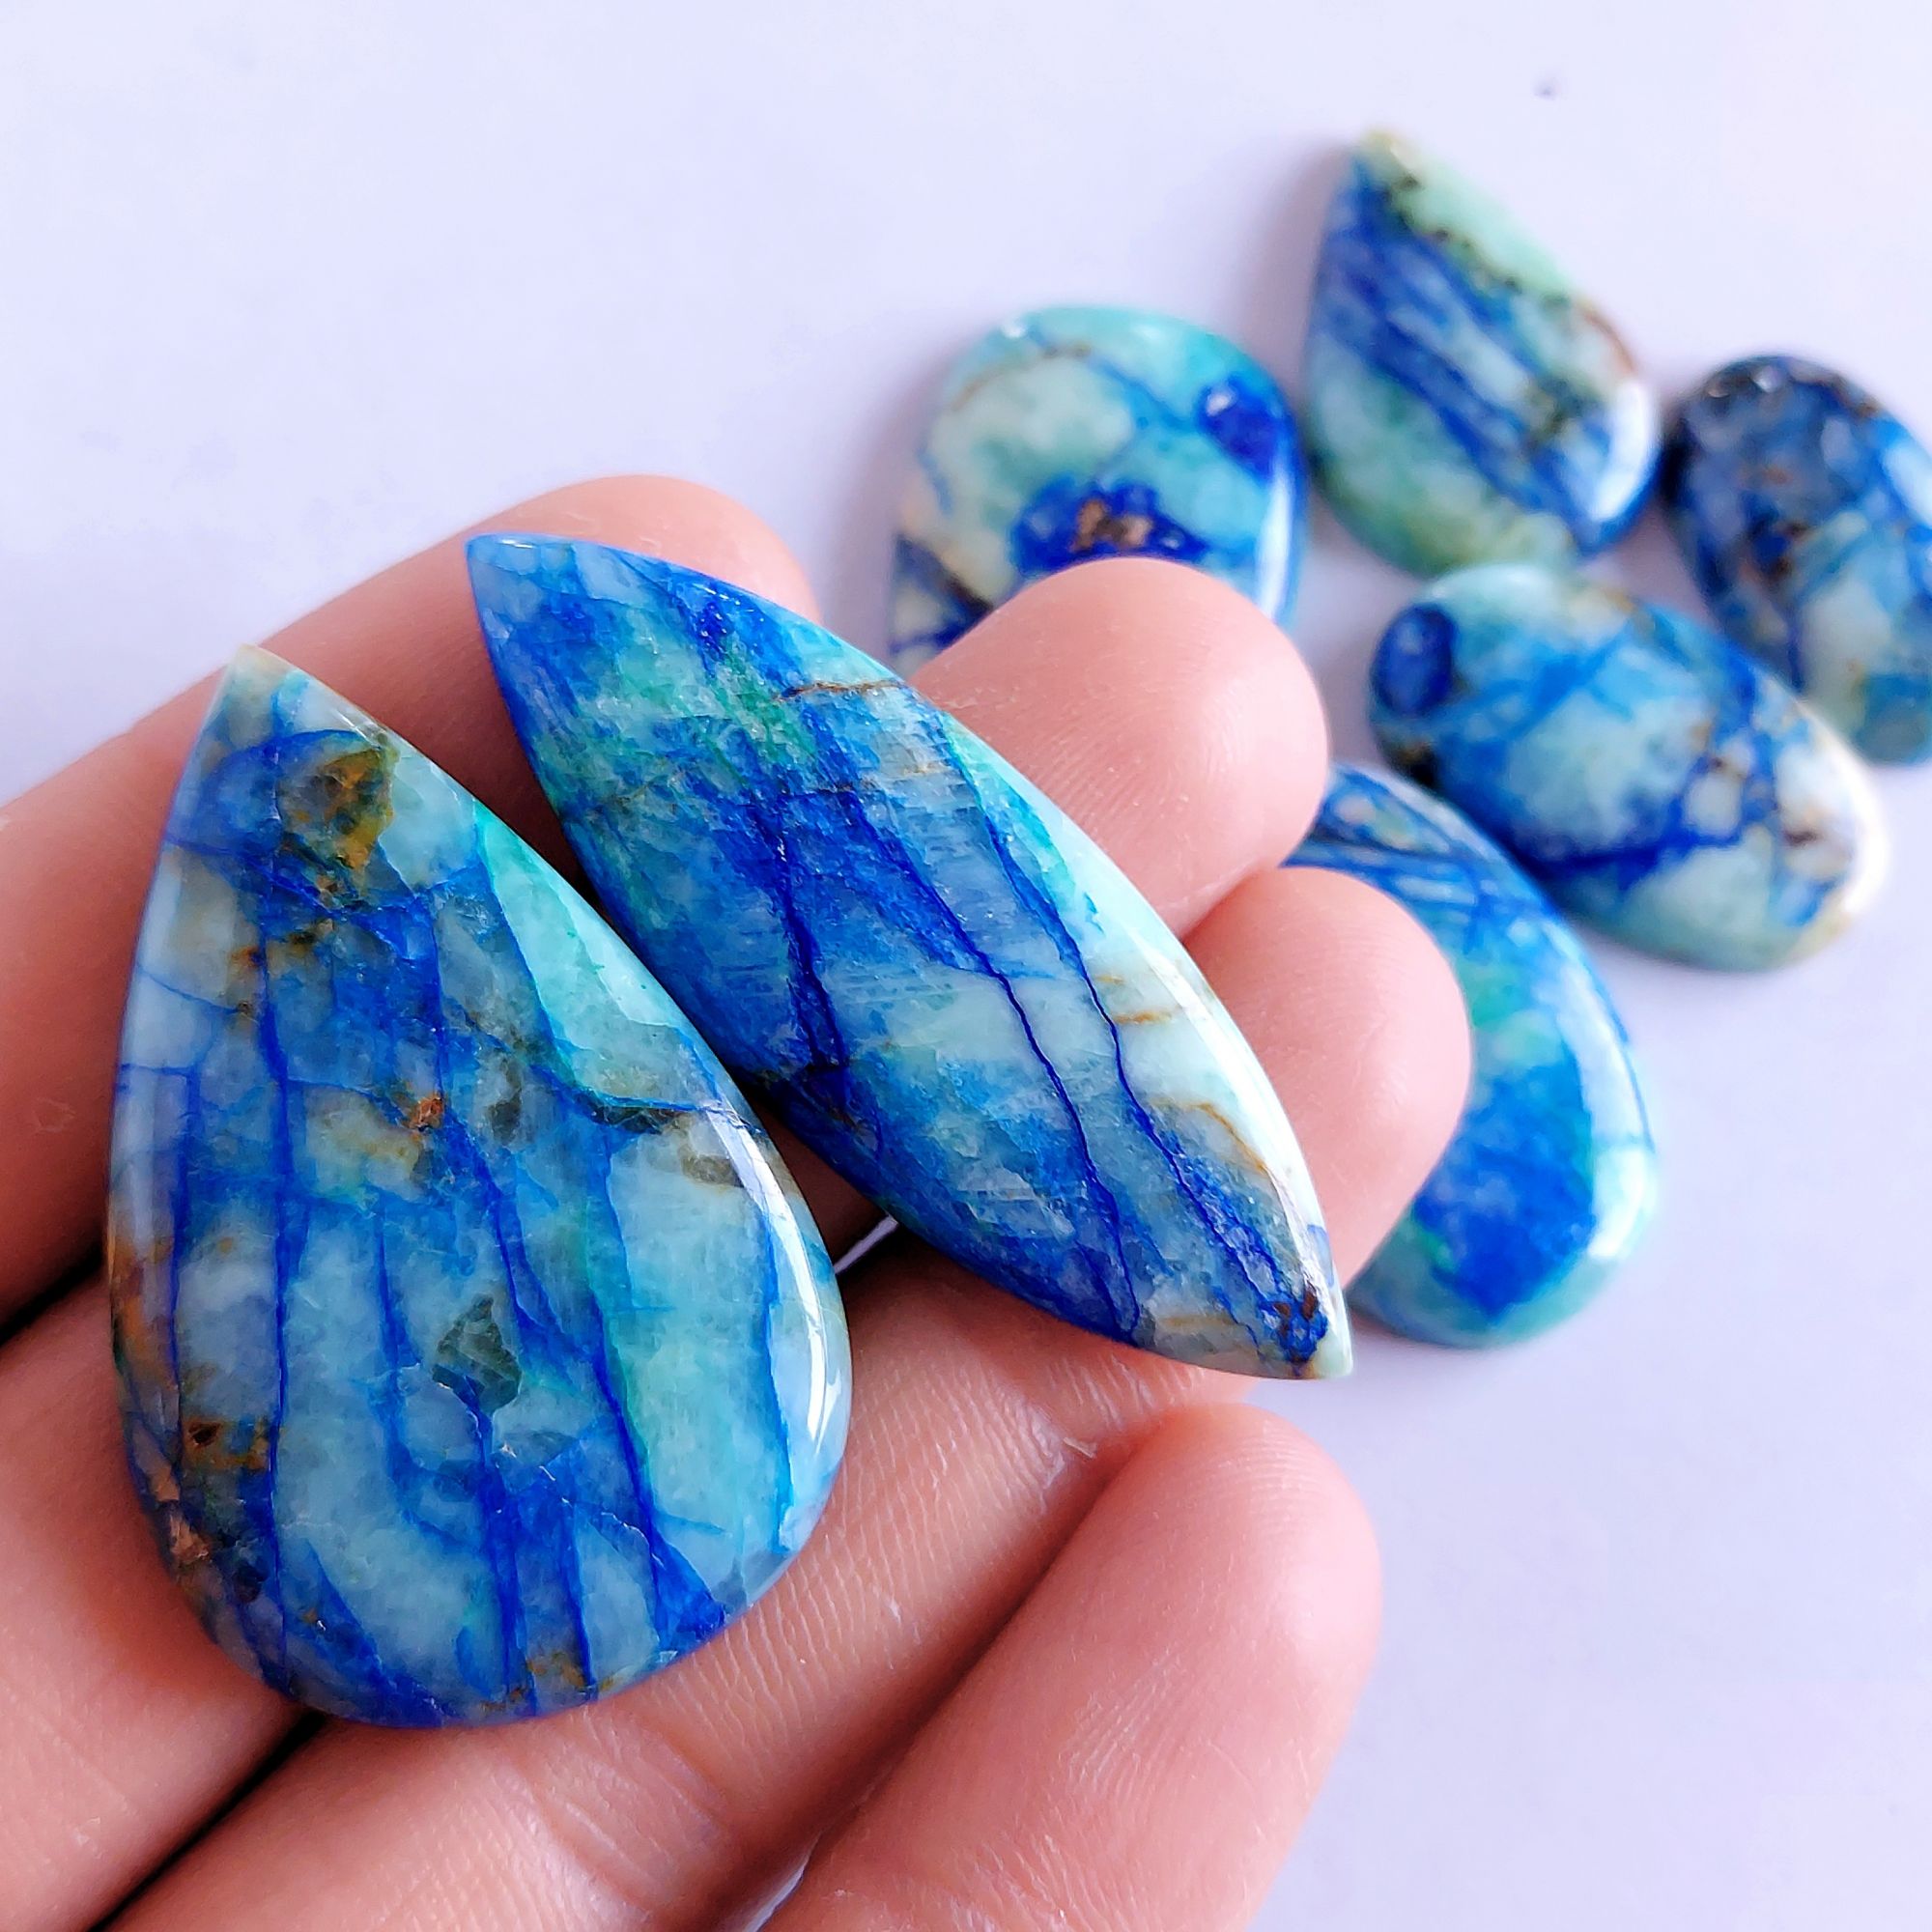 224.Cts 7 Pcs Natural Smooth Azurite Mix Loose Gemstone Cabochon Lot Size 48x16 24x15mm Wholesale Gemstone For jewelry